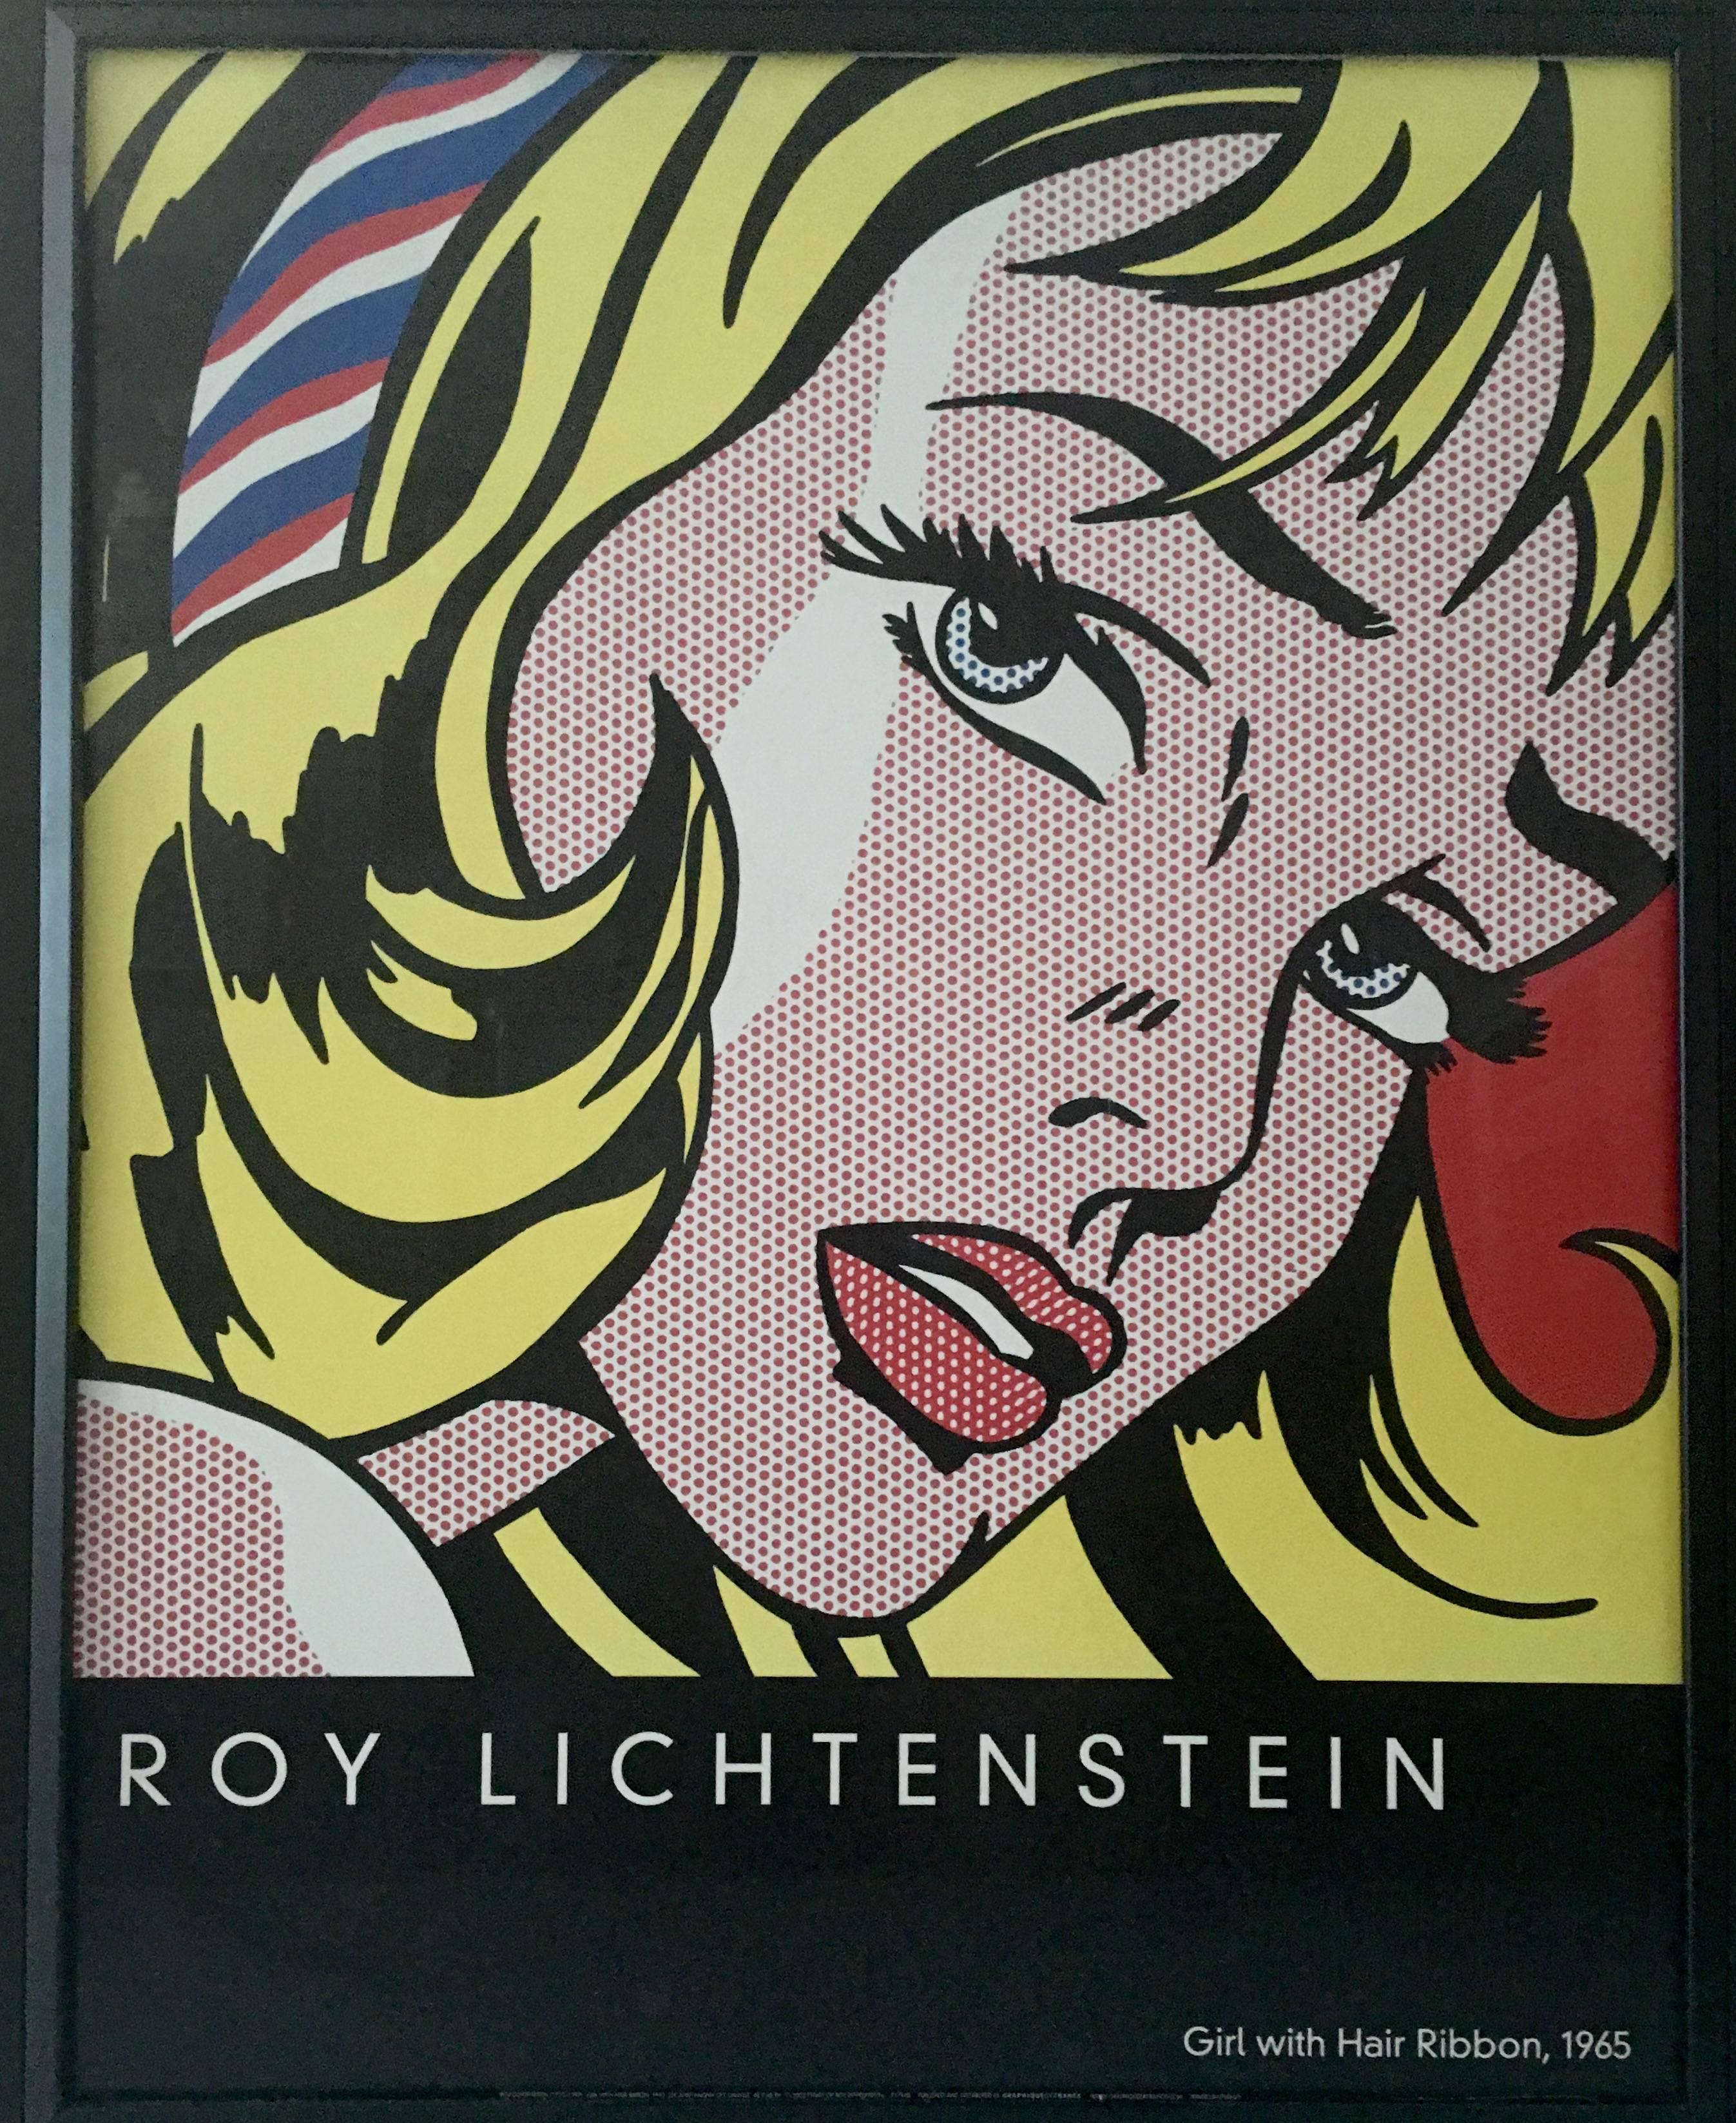 2003 edition lithograph "Girl with Hair Ribbon" 1965 by, Roy Lichtenstein. Bottom reads, oil on magna on canvas 48x48 In. 2003 Estate of Roy Lichtenstein,y1794D .Published and distributed by QueDeFrance Printed In France. Professionally